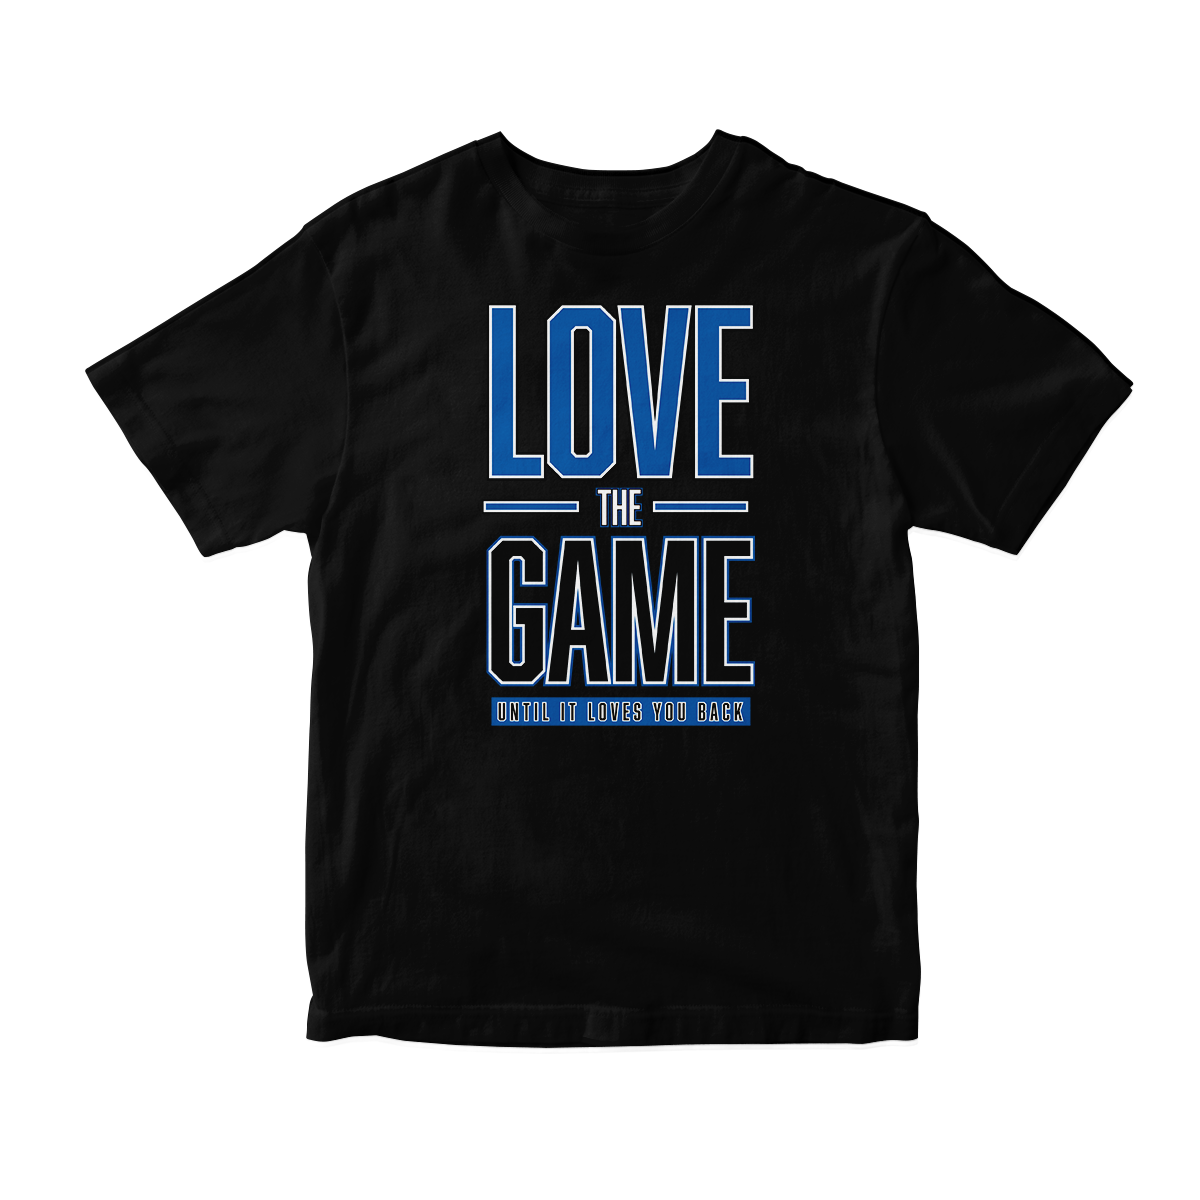 'Love The Game' in Game Royal CW Unisex Short Sleeve Tee